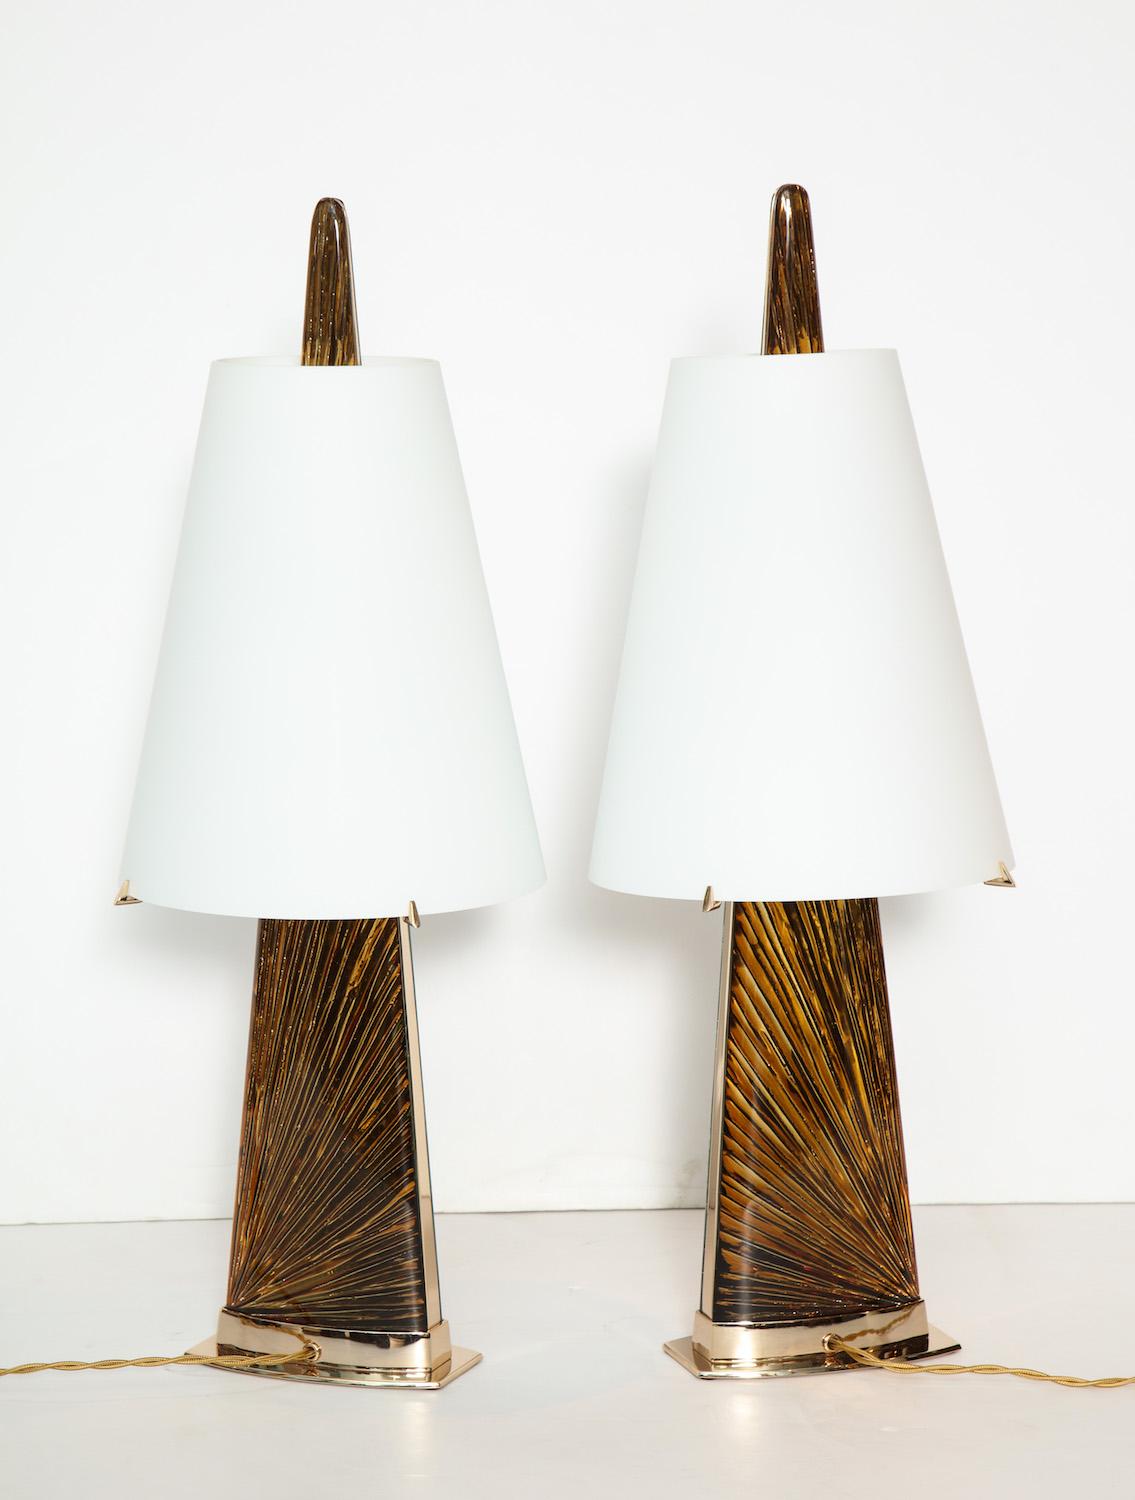 Contemporary Studio-Made “Abisso” Lamps by Ghiró Studio